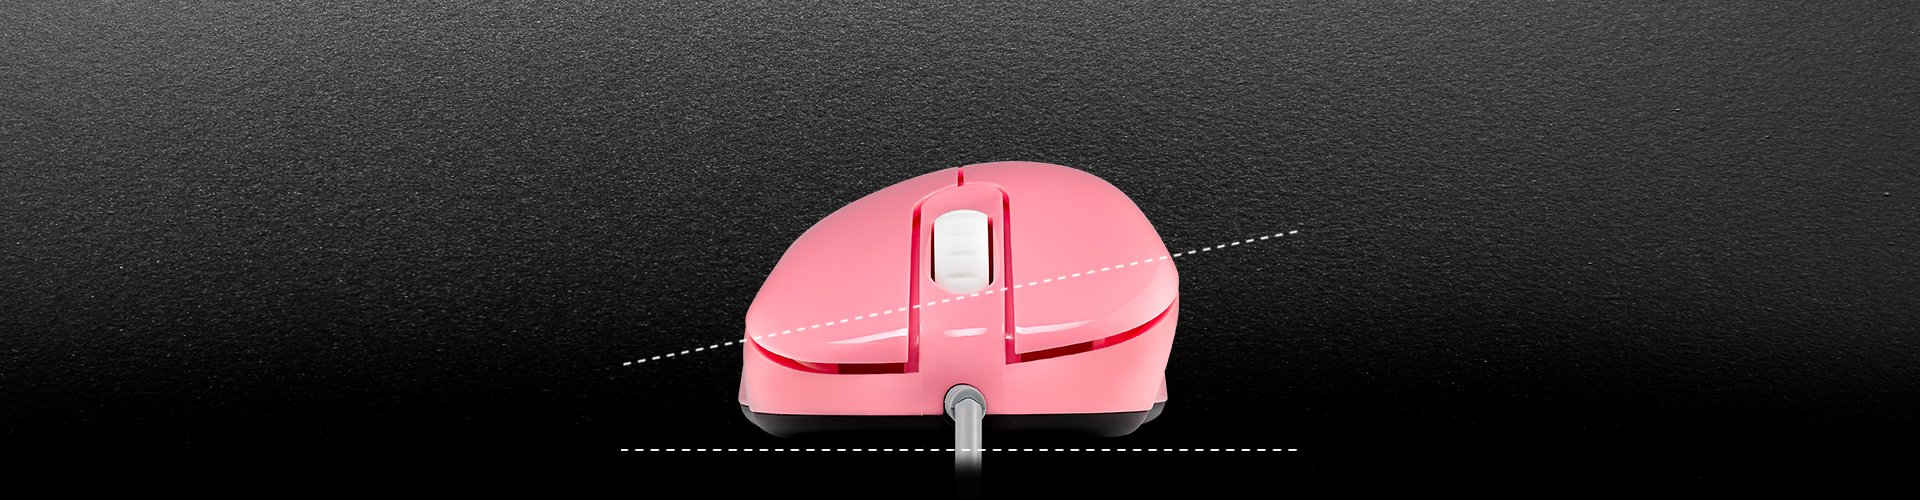 zowie-esports-gaming-mouse-ec1-b-divina-pink-non-symmetrical-design